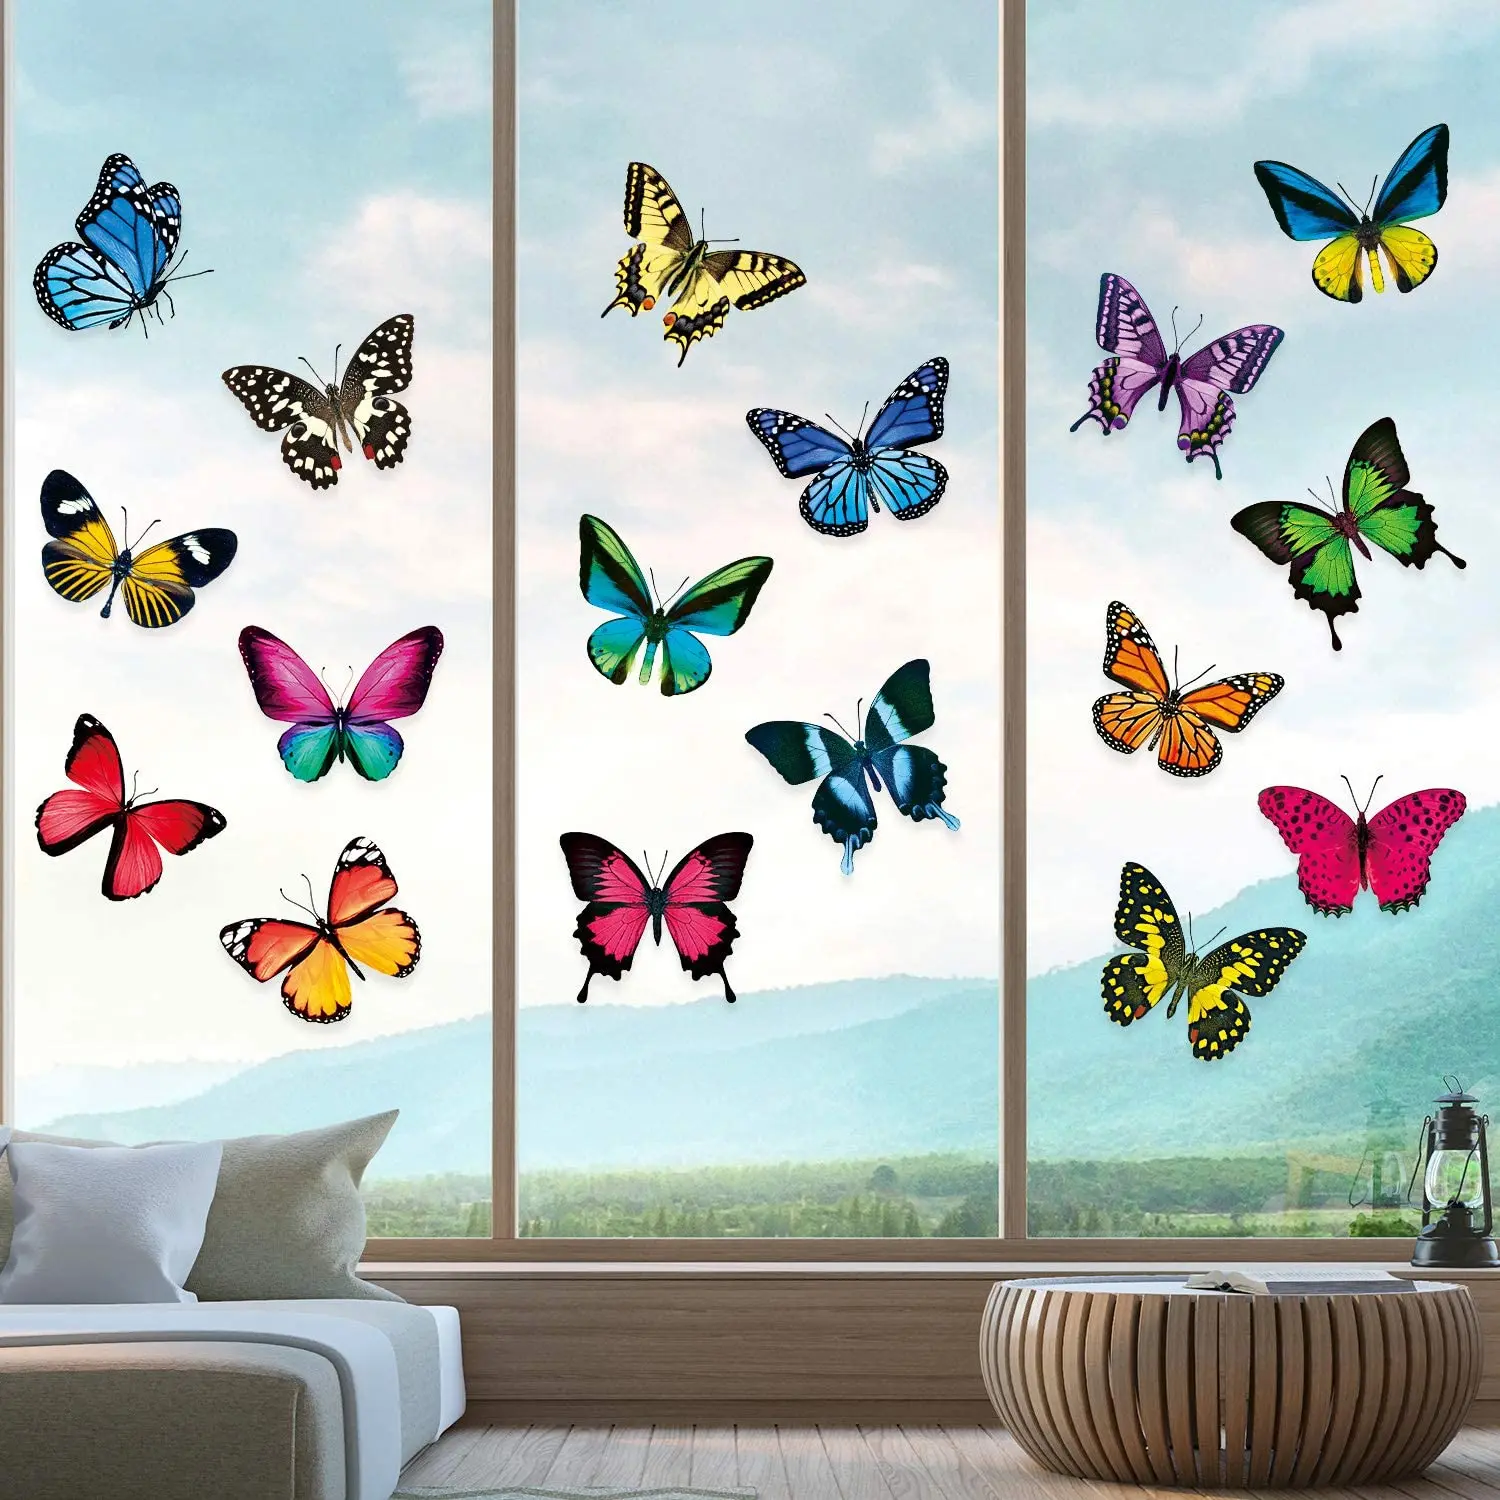 Frienda 40 Pieces Butterfly Window Clings Anti-collision Window Clings Decals to Prevent Bird Strikes on Window Glass Non Adhesive Vinyl Cling Butterfly Stickers 